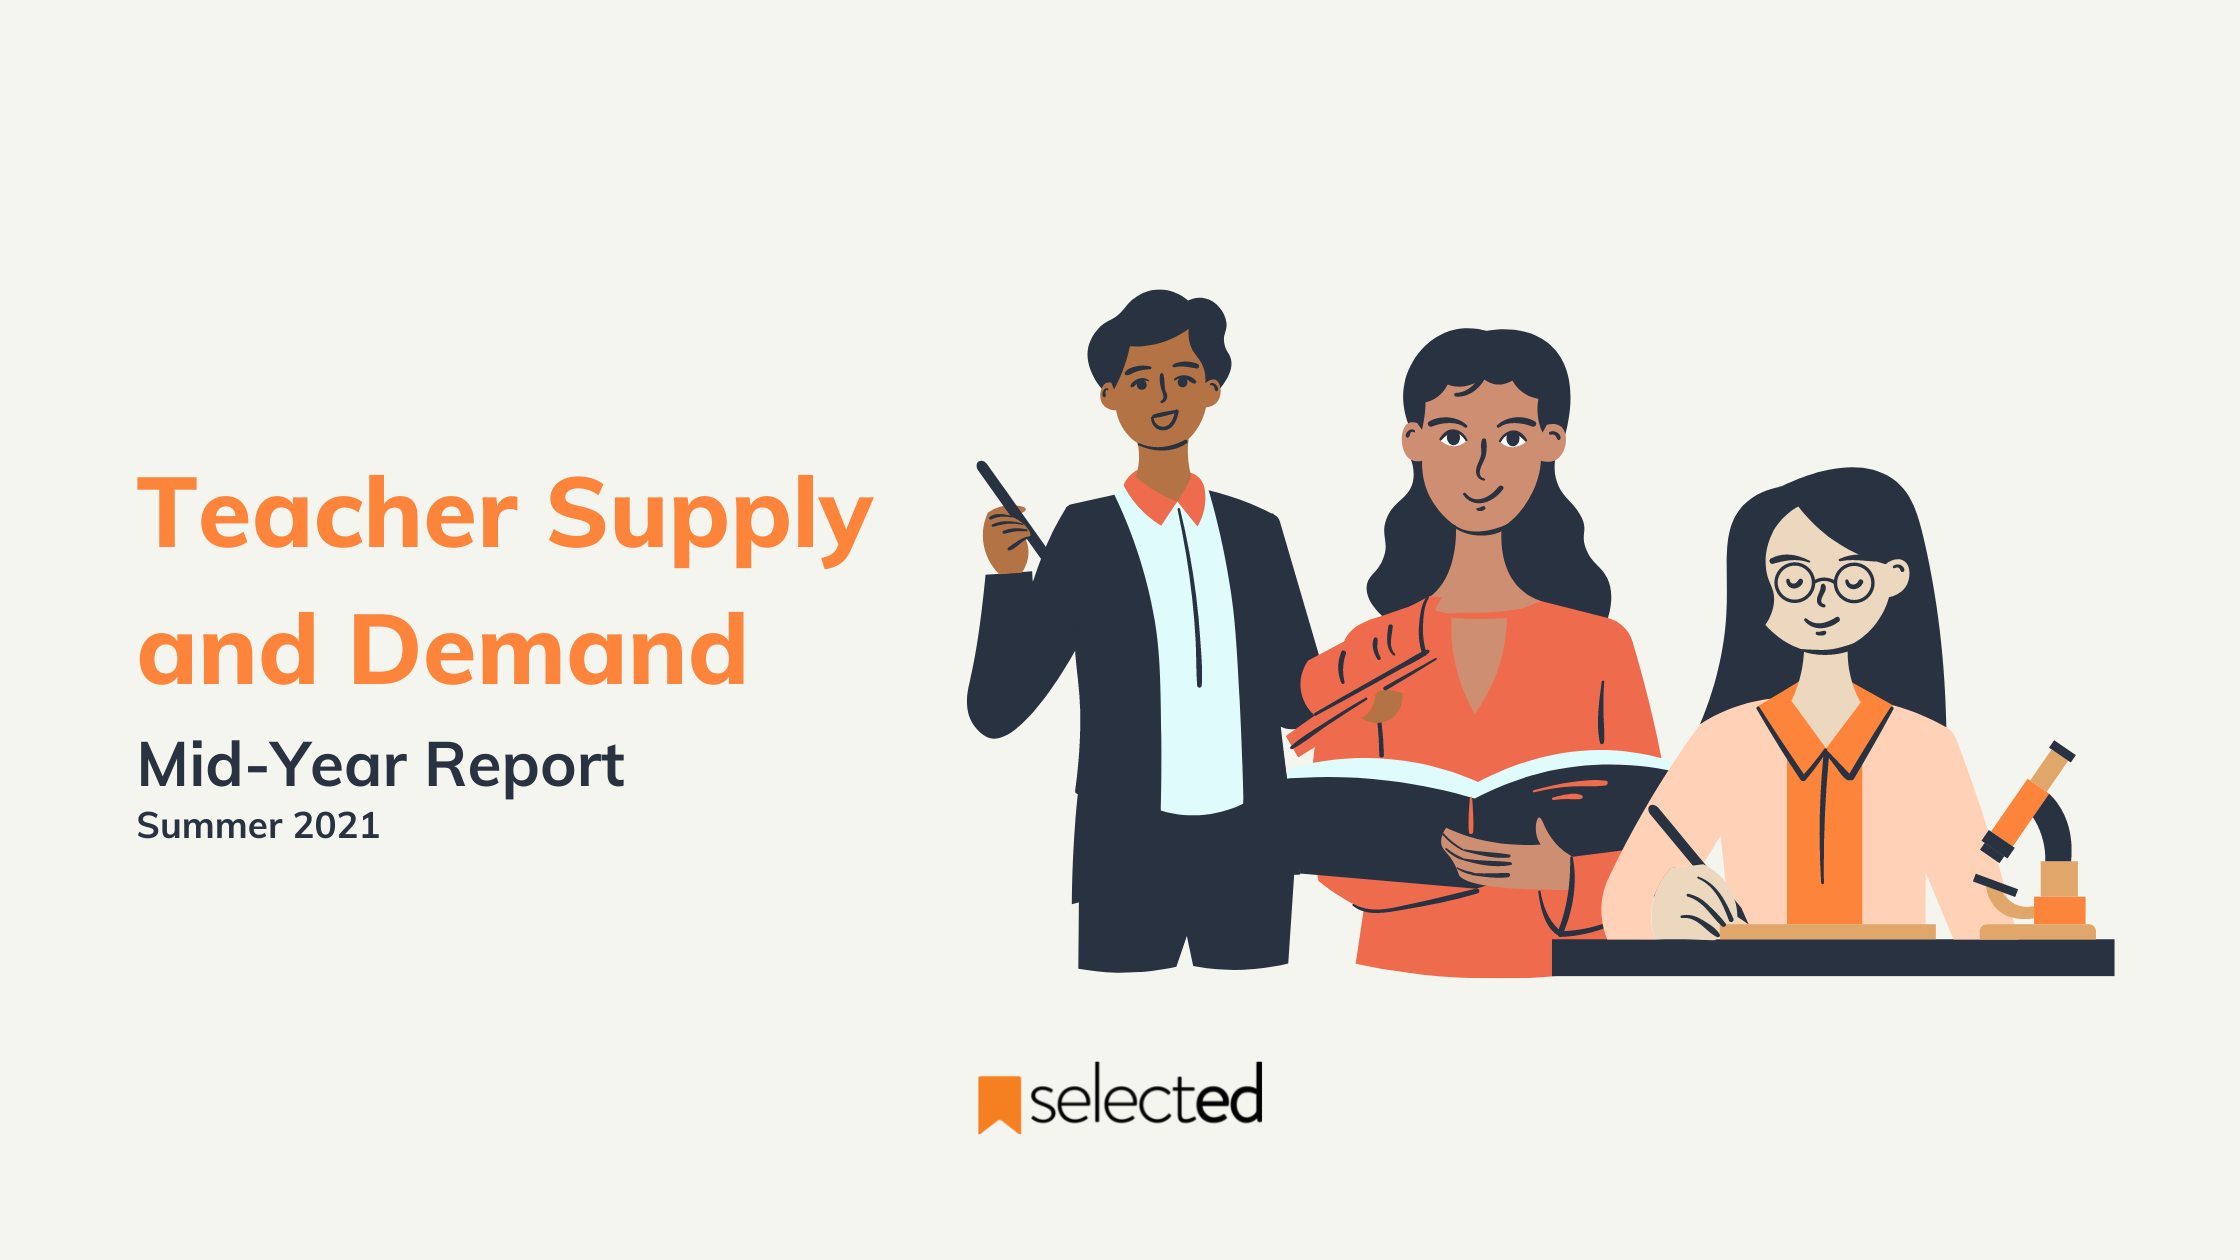 Teacher Supply and Demand: Mid-Year Report (Summer 2021)